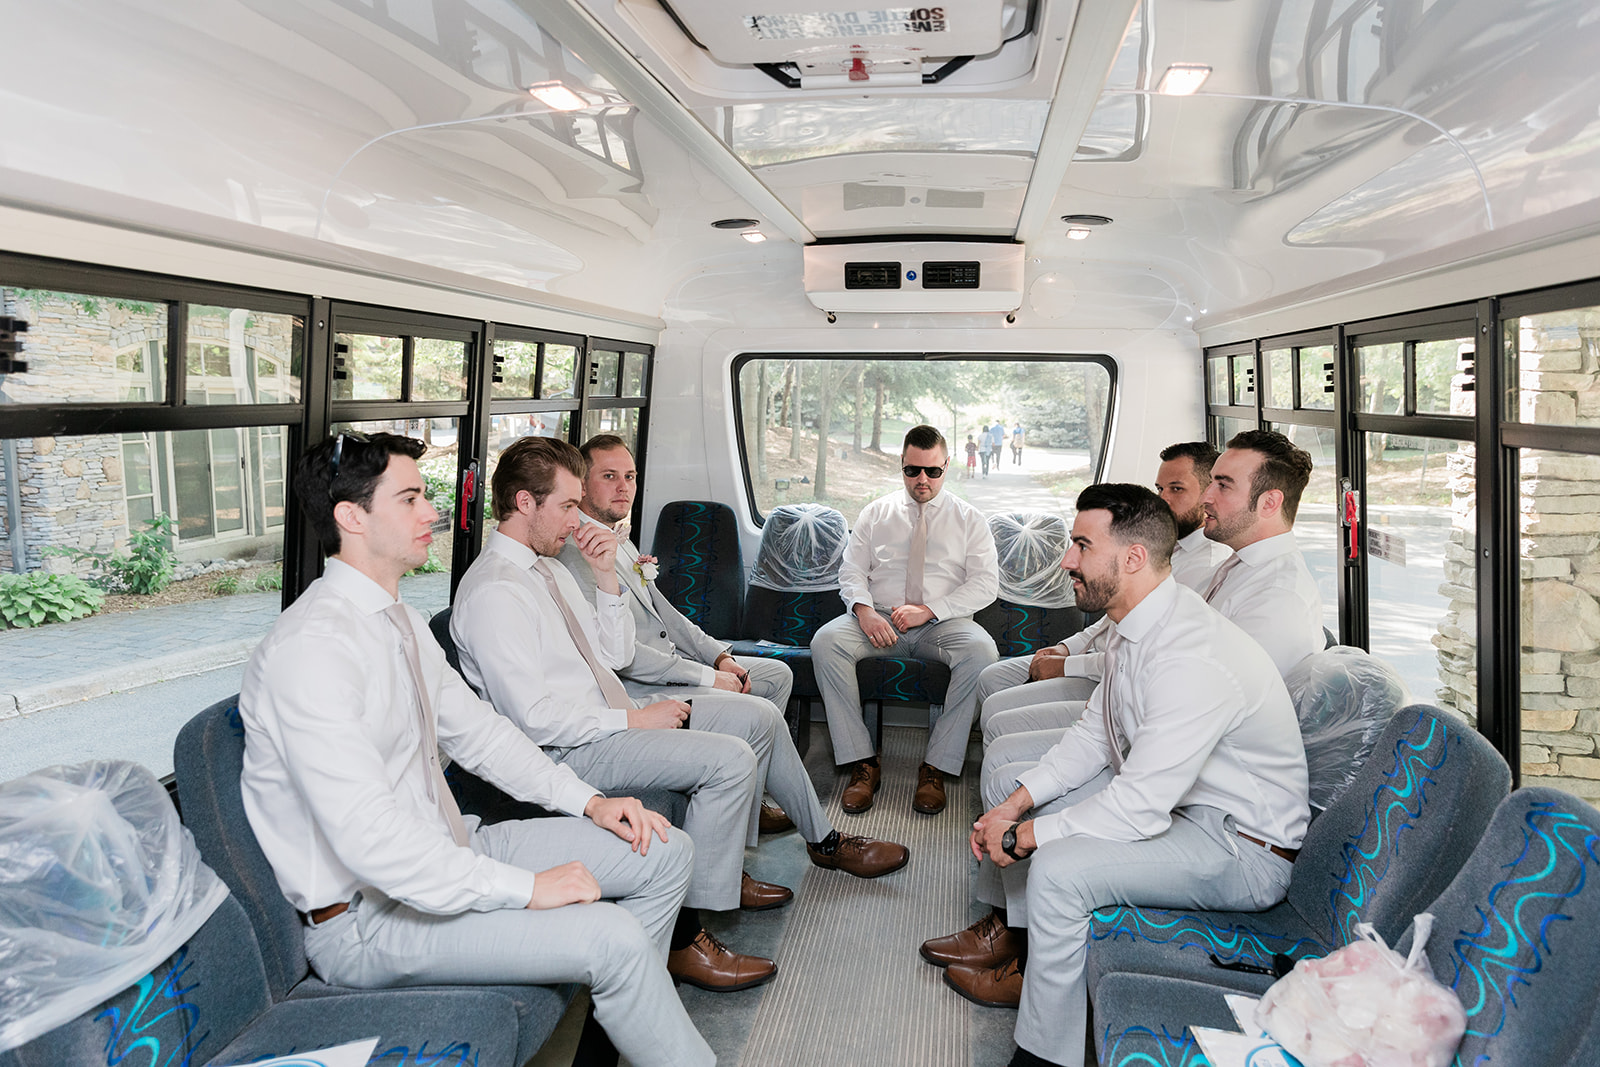 Groom and groomsmen riding in the shuttle